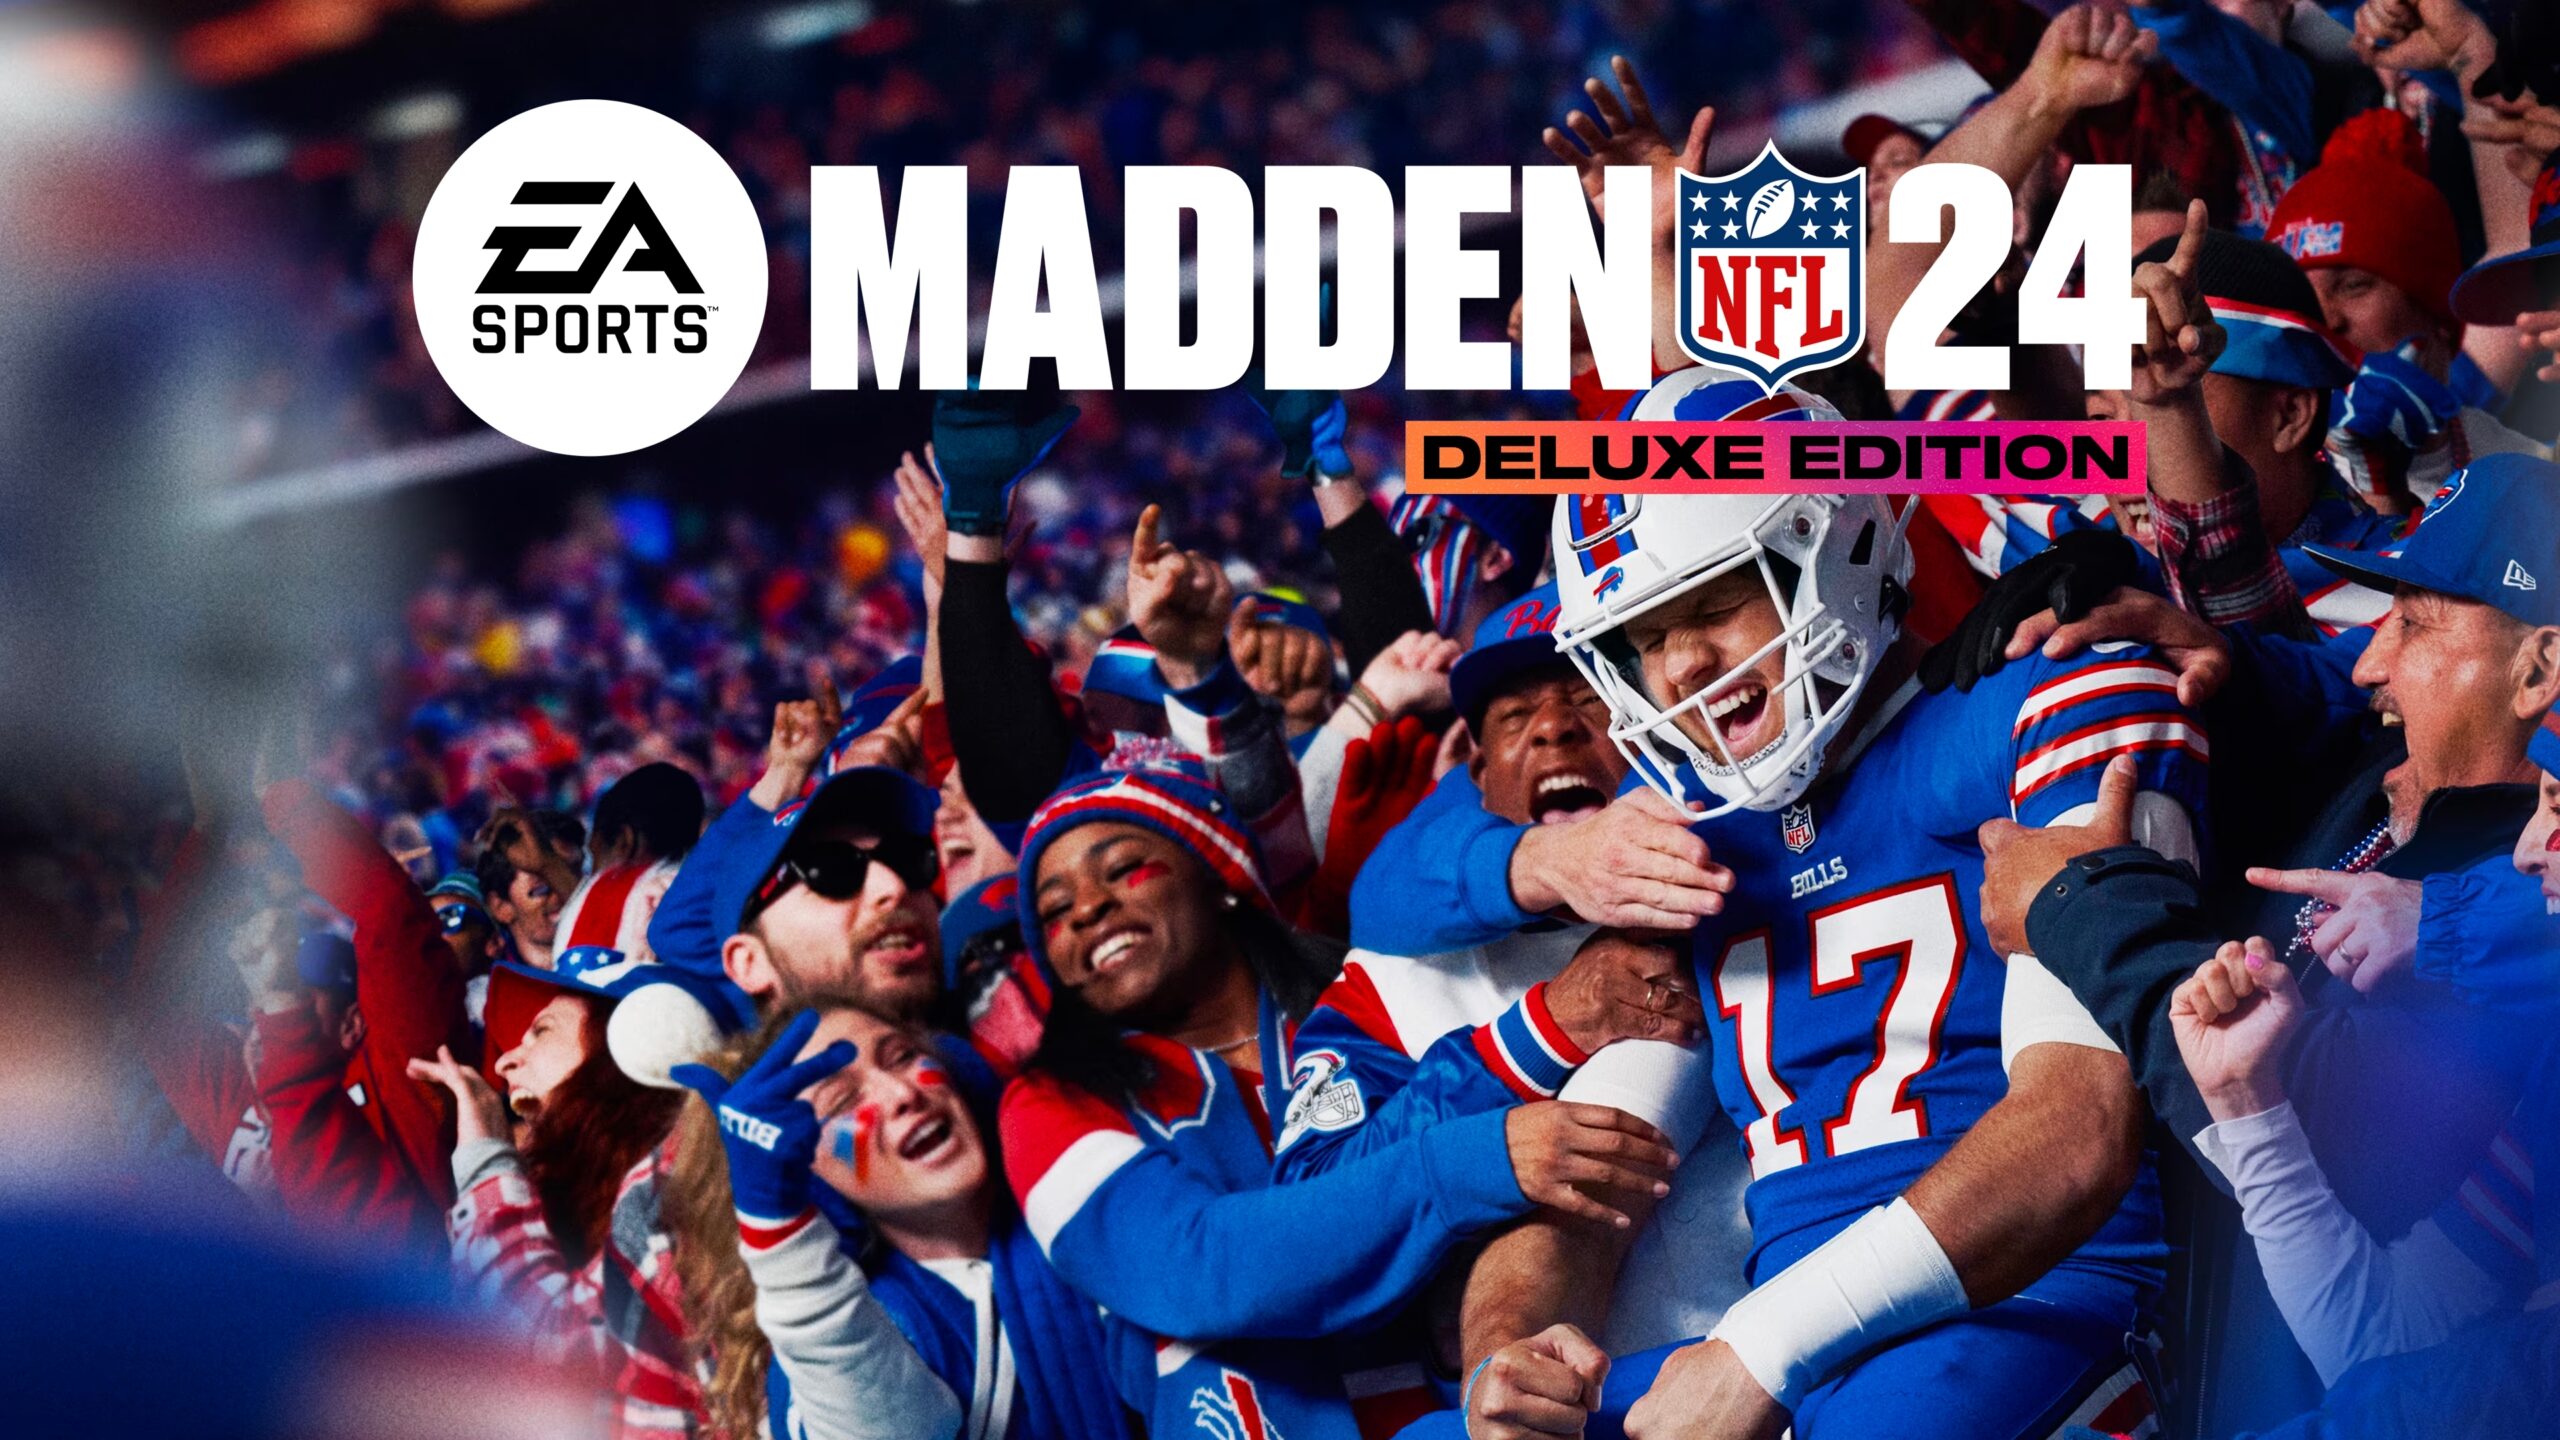 madden-nfl-24-deluxe-edition-xbox-one-xbox-series-x-s-deluxe-edition-xbox